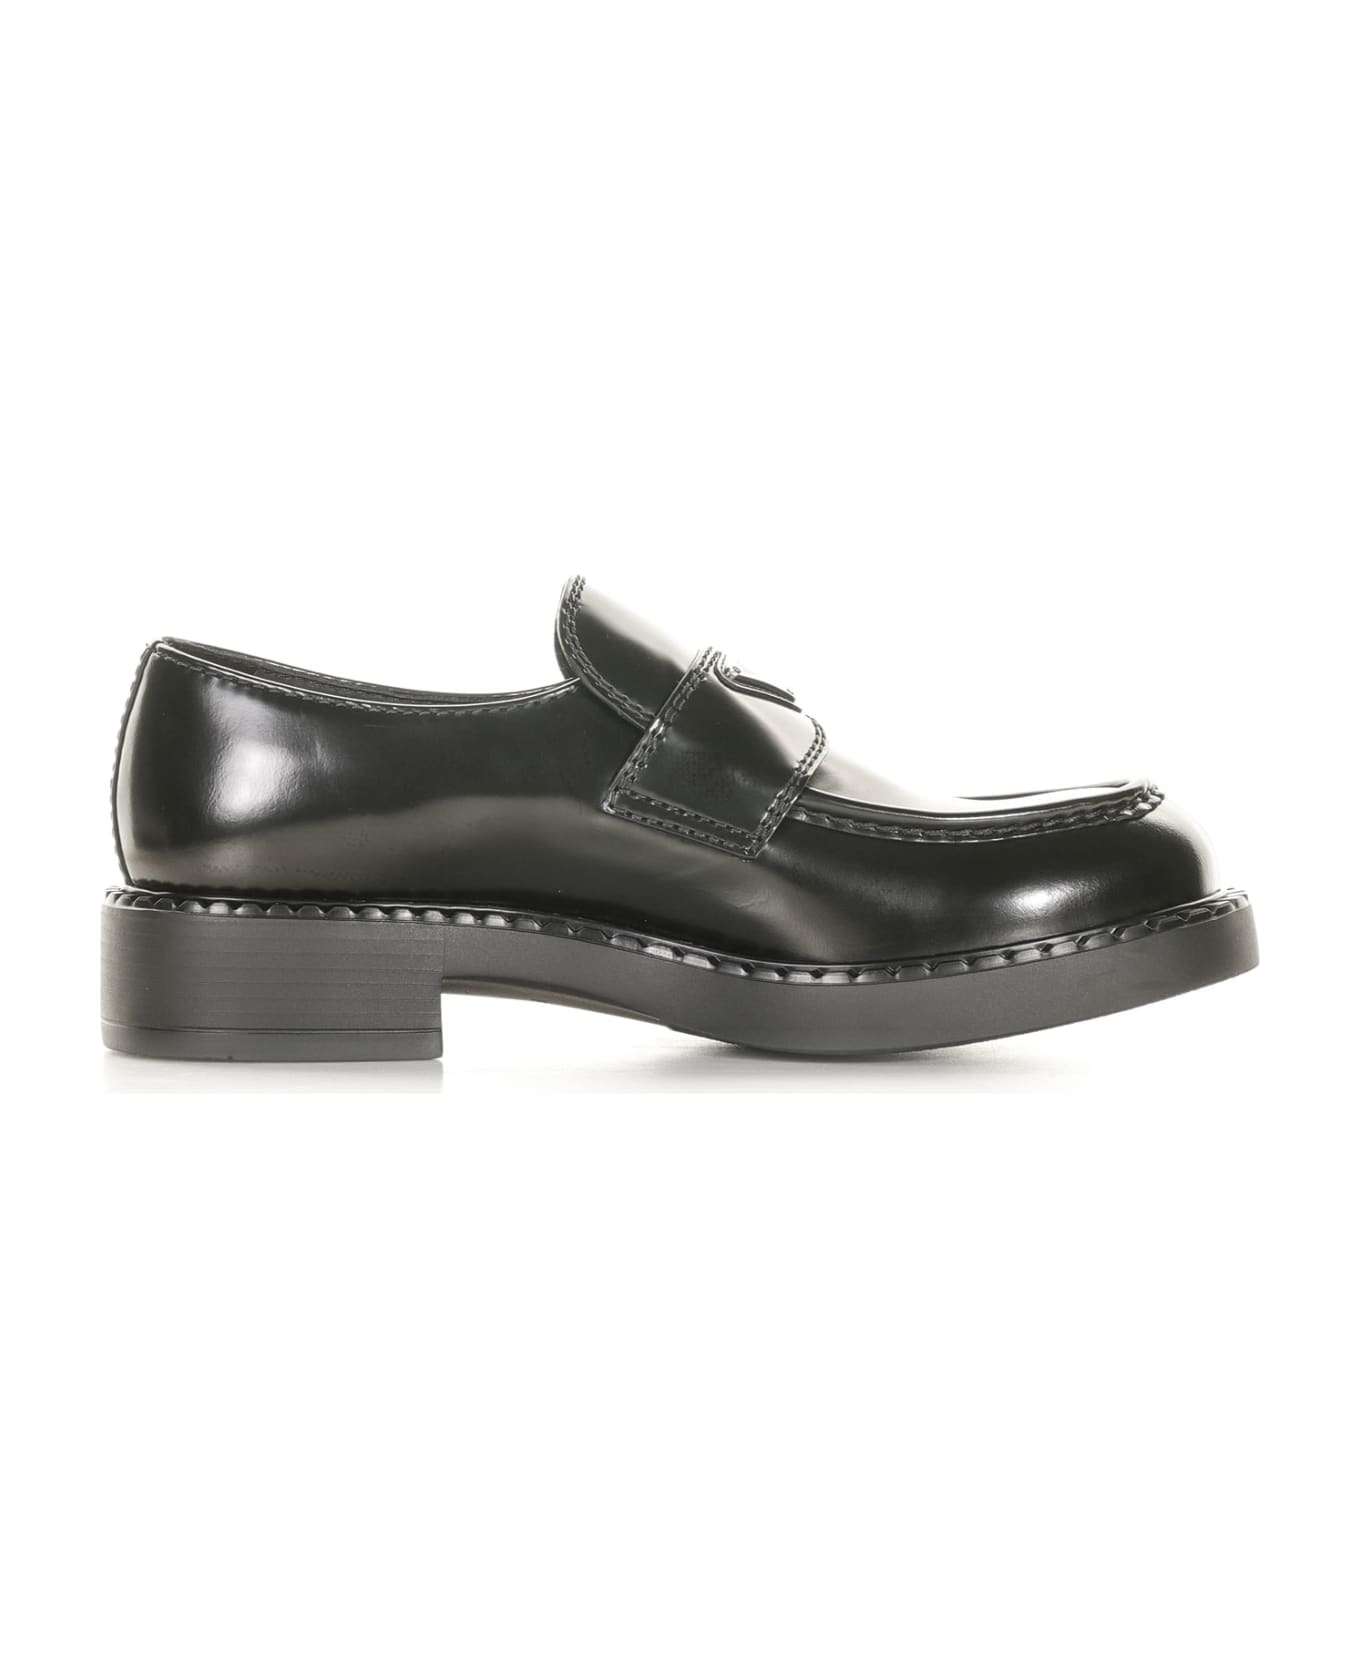 Prada Chocolate Loafers In Brushed Leather - Nero